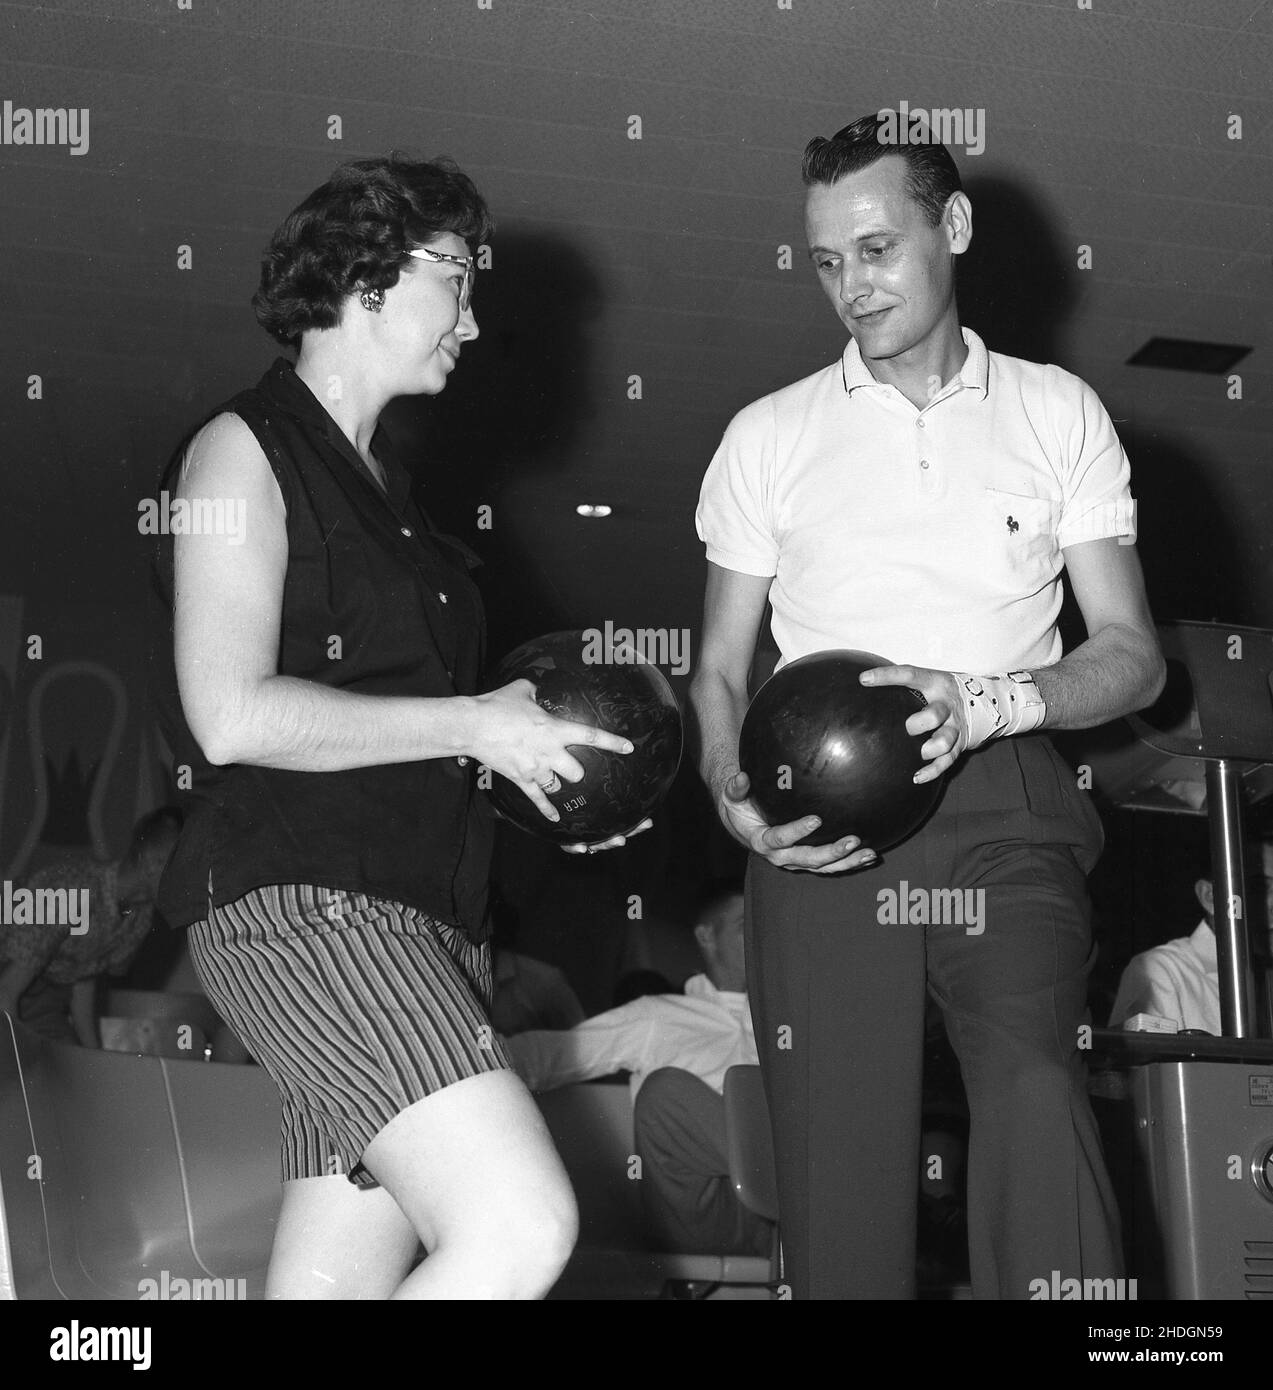 1960, historical, ten-pin bowlers, man and woman holding their balls, with the woman using two fingers and her thumb in the three holes, Columbus, Ohio, USA. In the 1950s and 60s, a popular lesiure pastime in the USA, ten-pin was also a competitive amateur sport, with an organised, competitive league structure, with both men and women teams. In 1958 the Professional Bowlers Association (PBA) was formed. Stock Photo